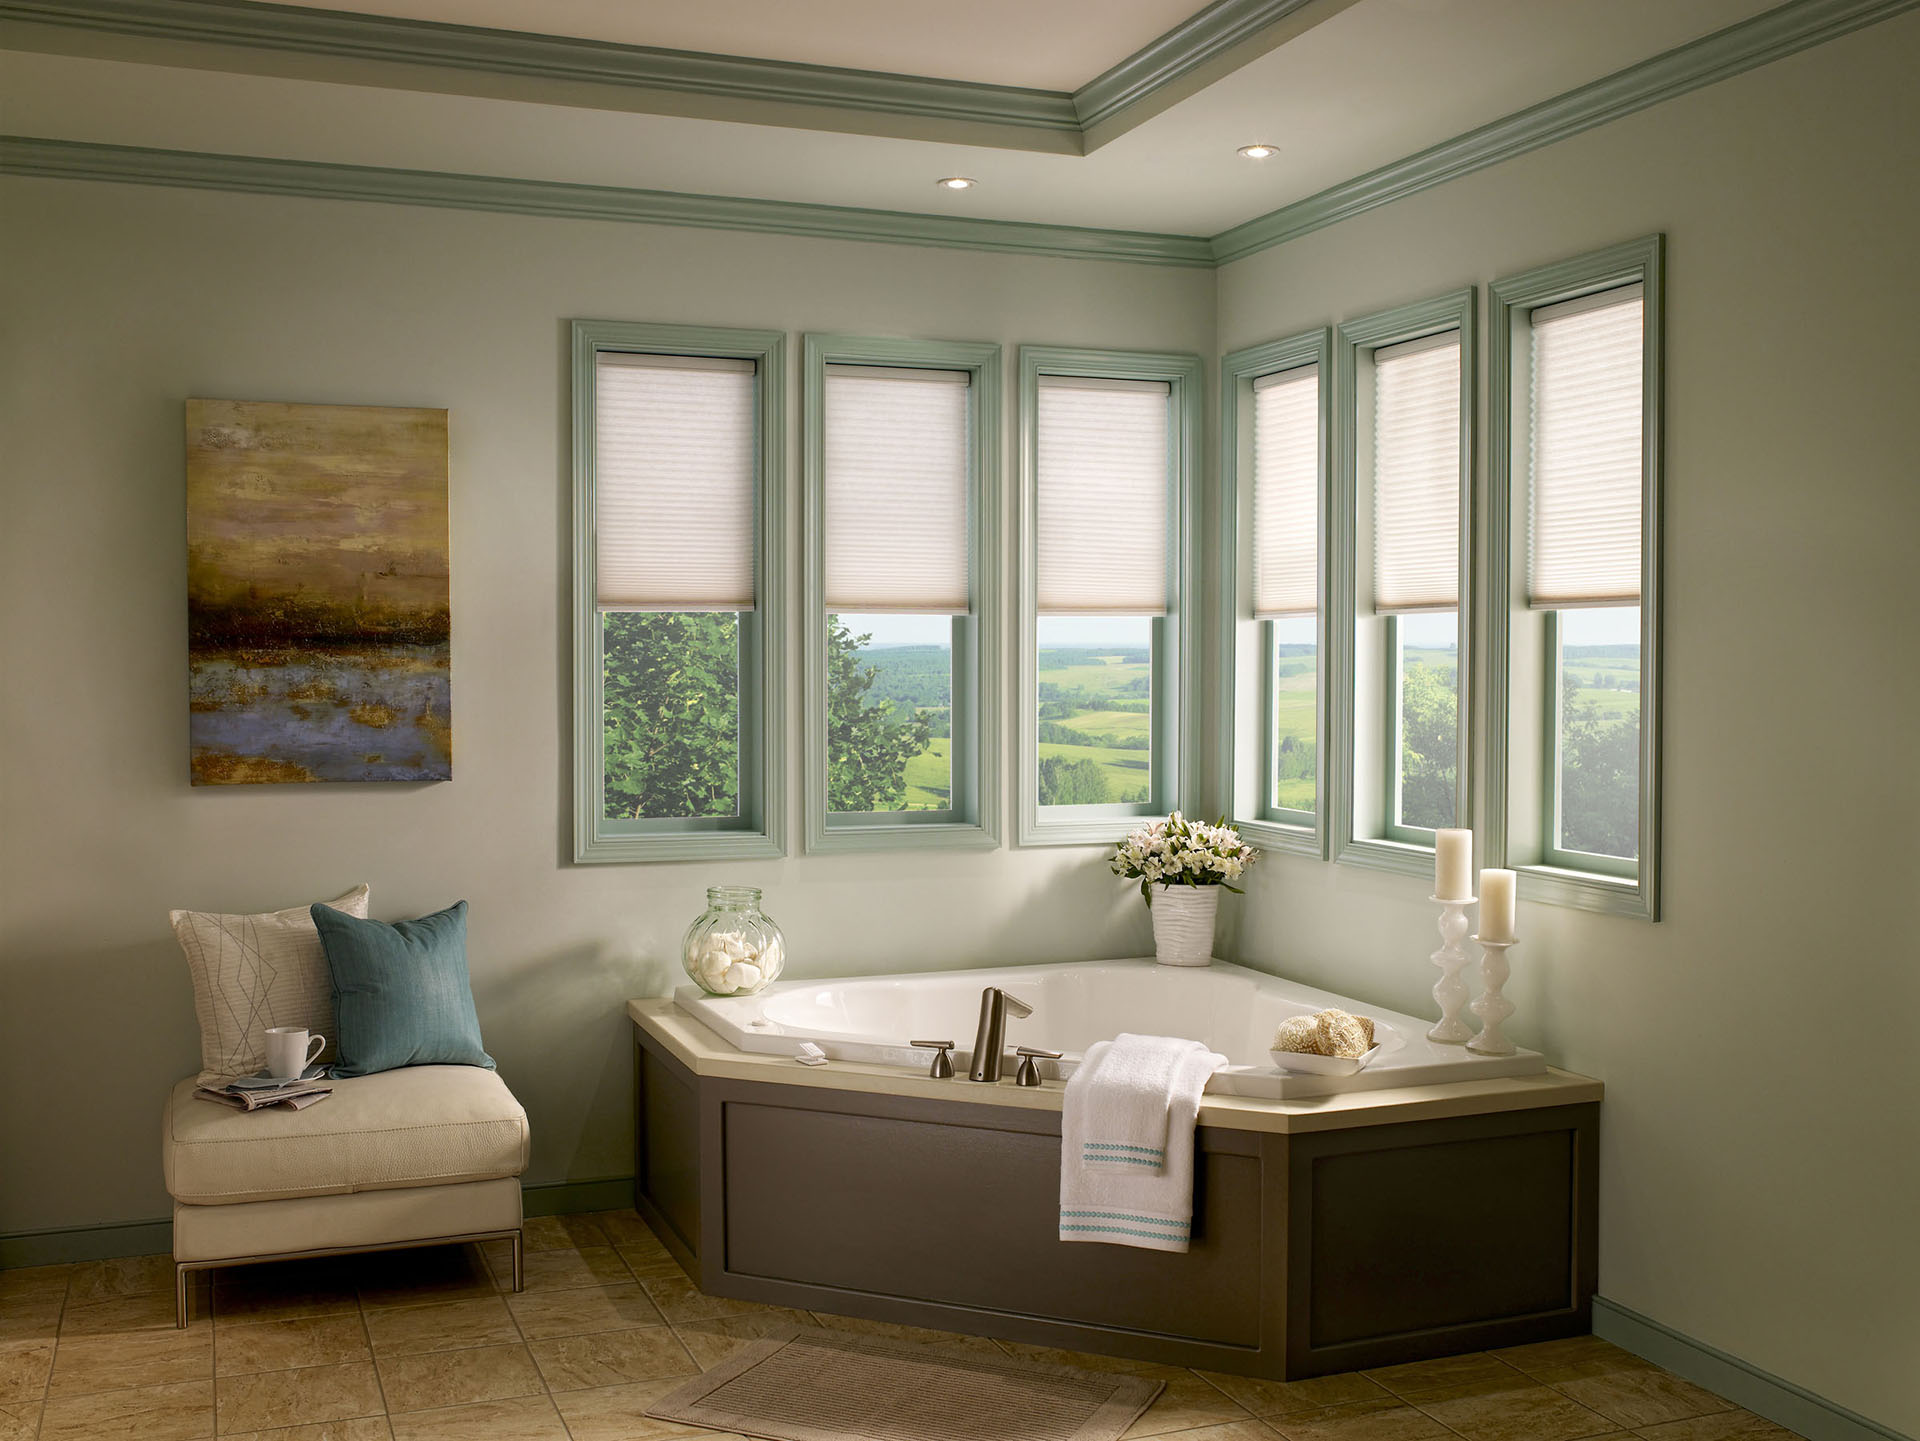 The Answers to Your Questions About Commercial Motorized Shades